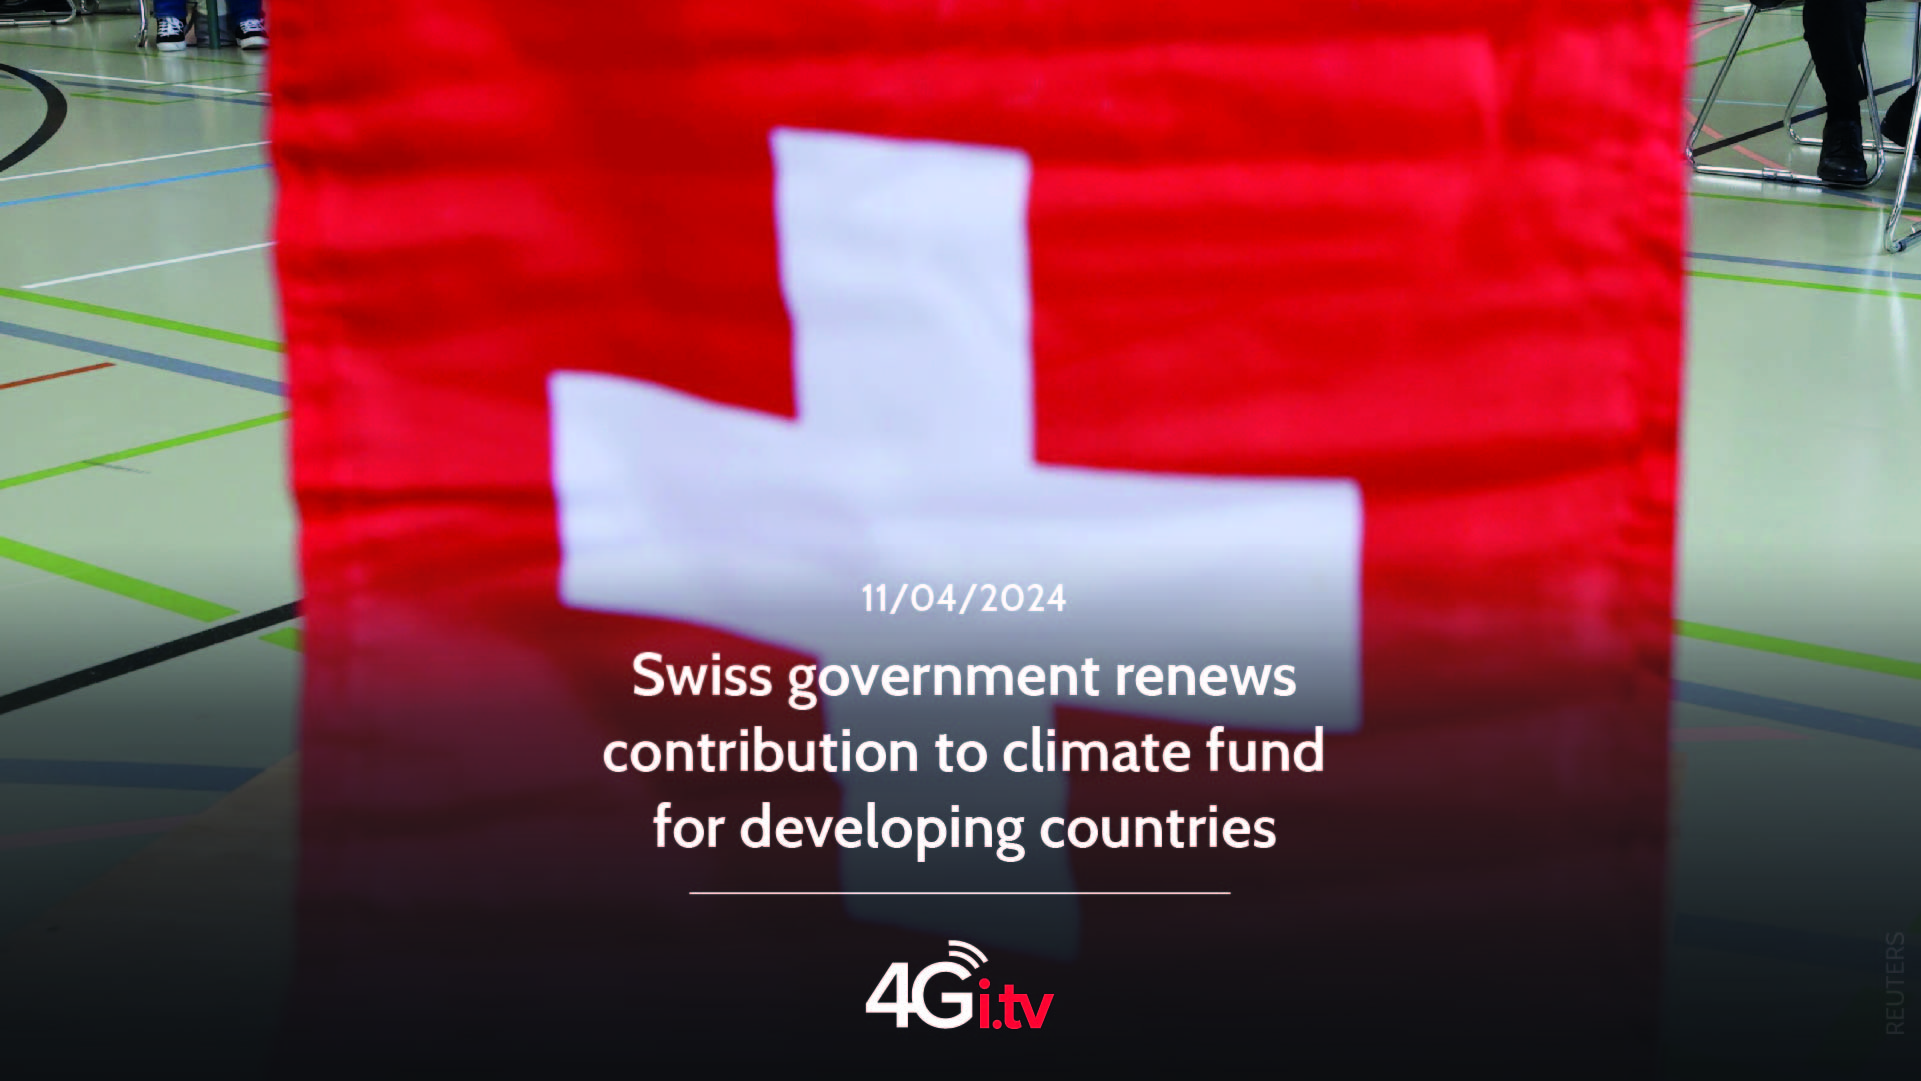 Подробнее о статье Swiss government renews contribution to climate fund for developing countries